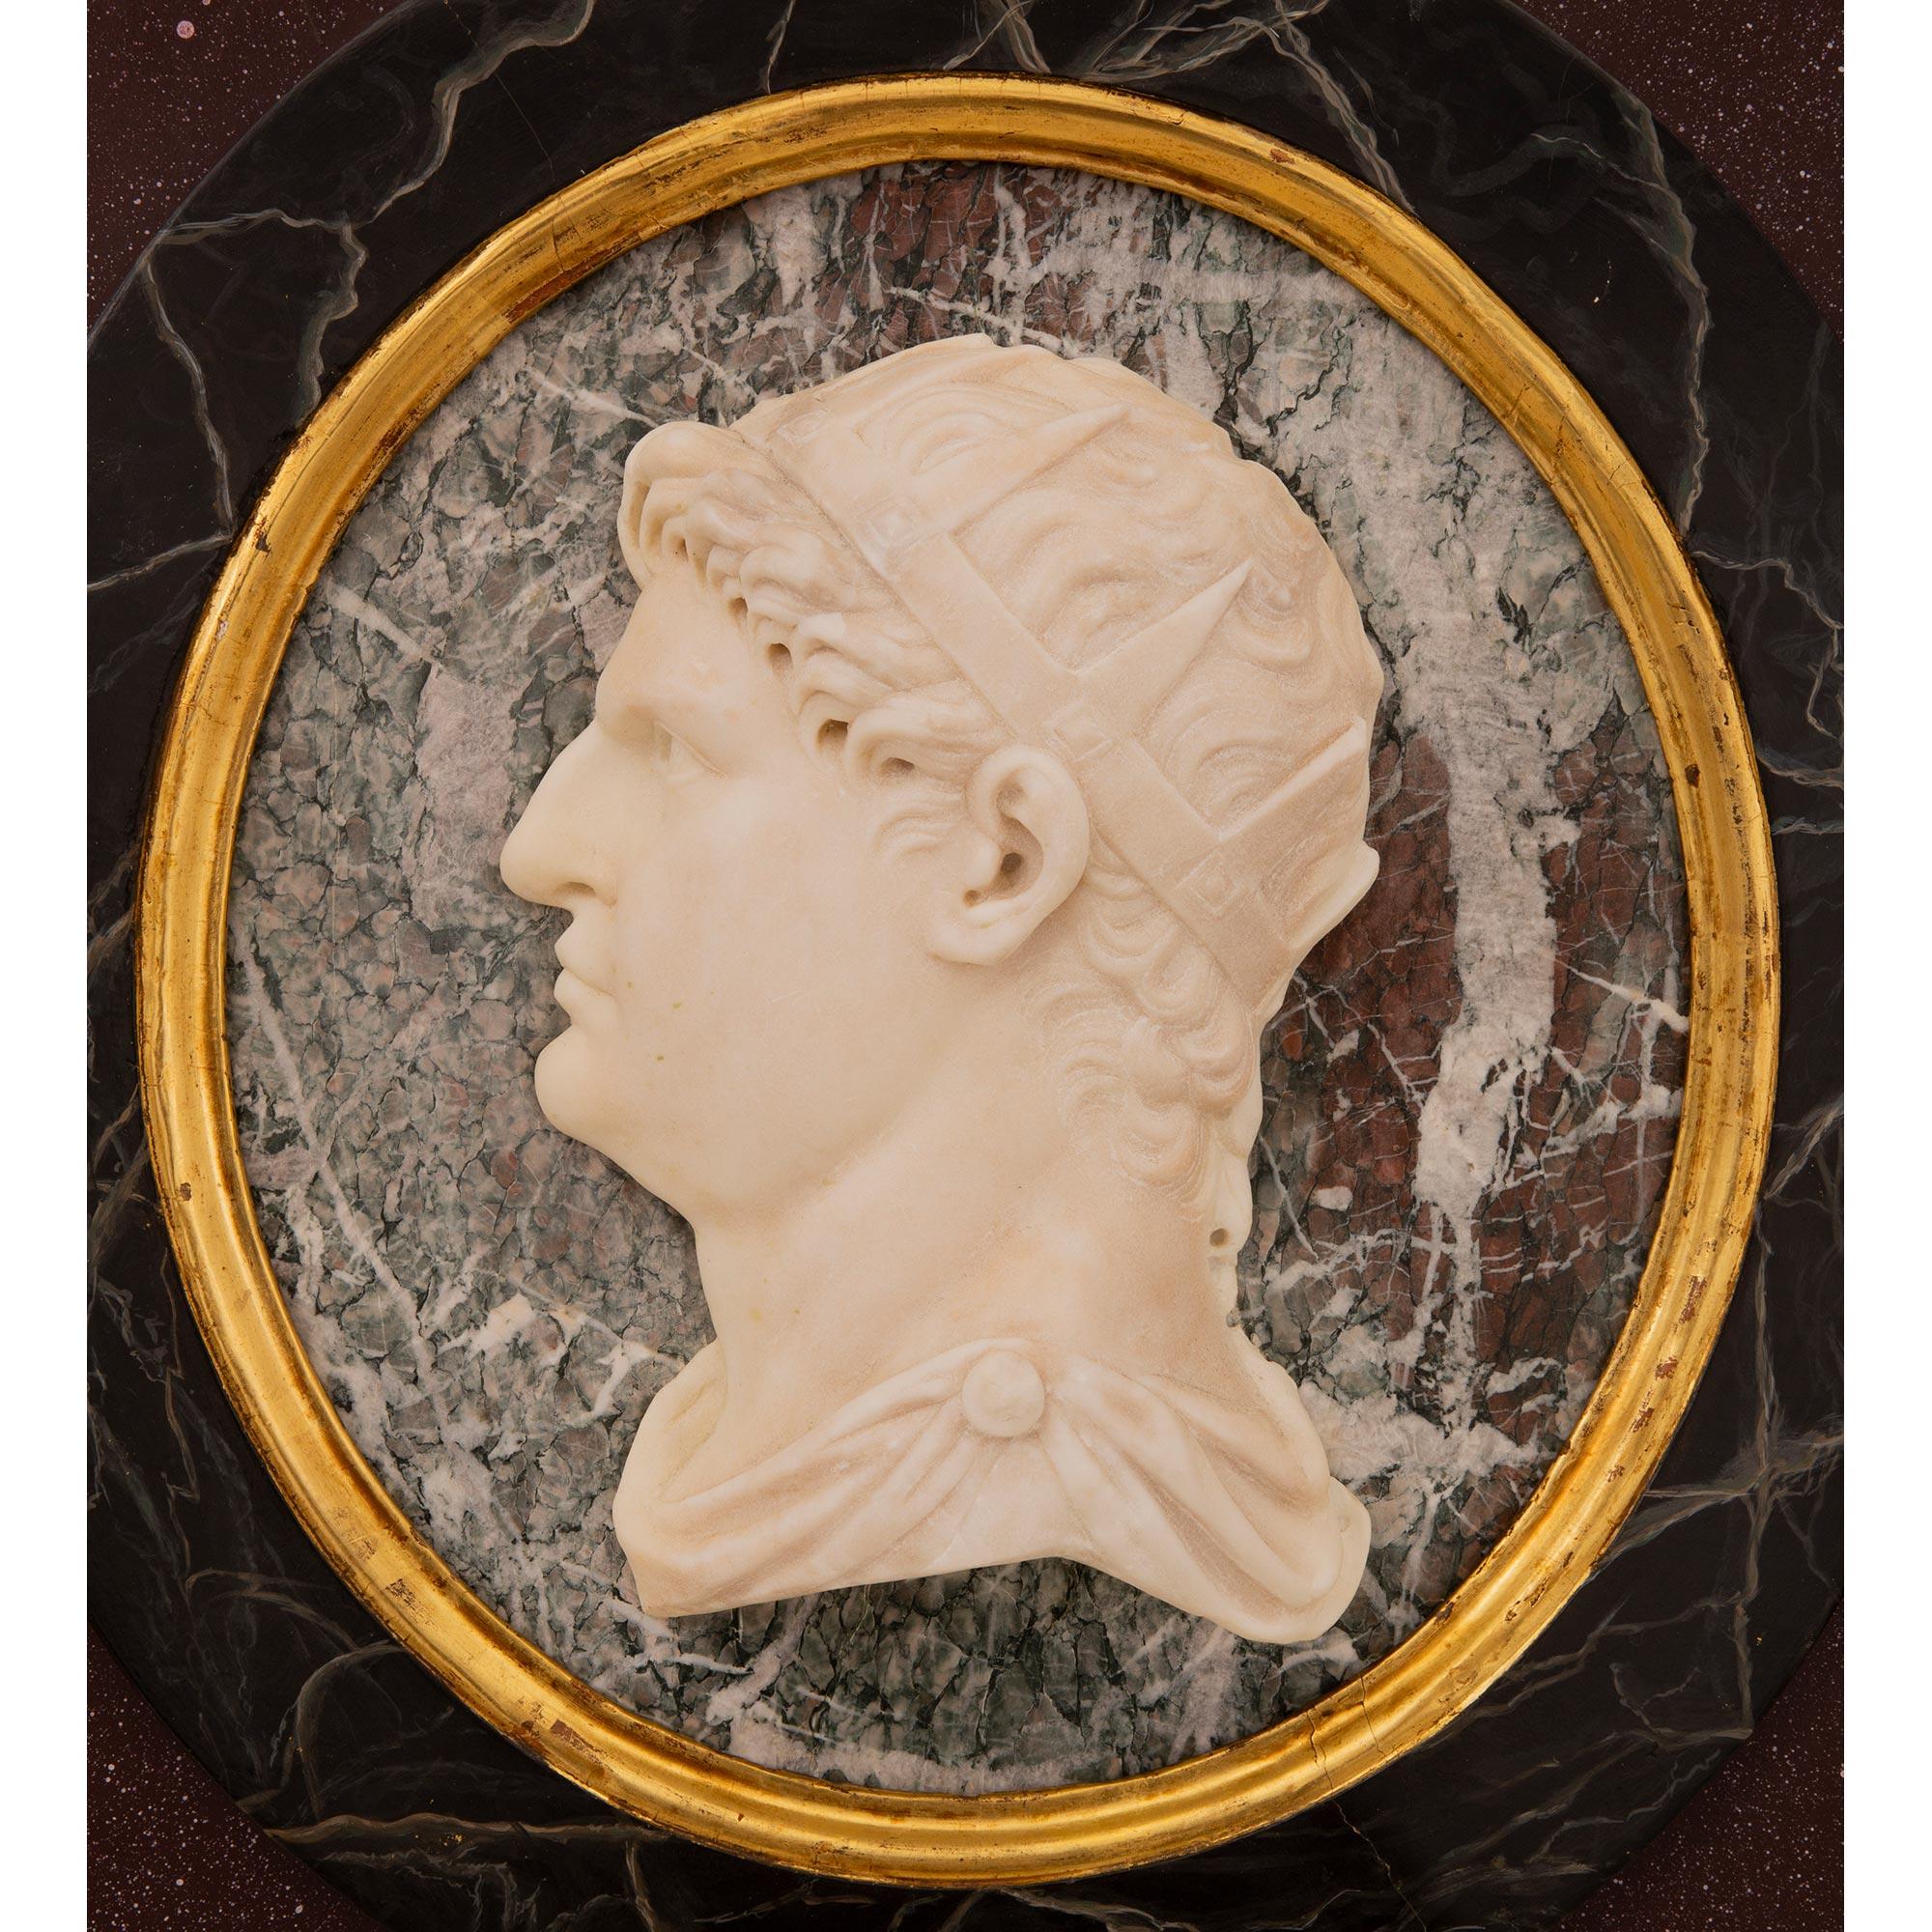 Italian 19th Century Neoclassical St. Decorative Wall Plaque of a Roman Emperor In Good Condition For Sale In West Palm Beach, FL